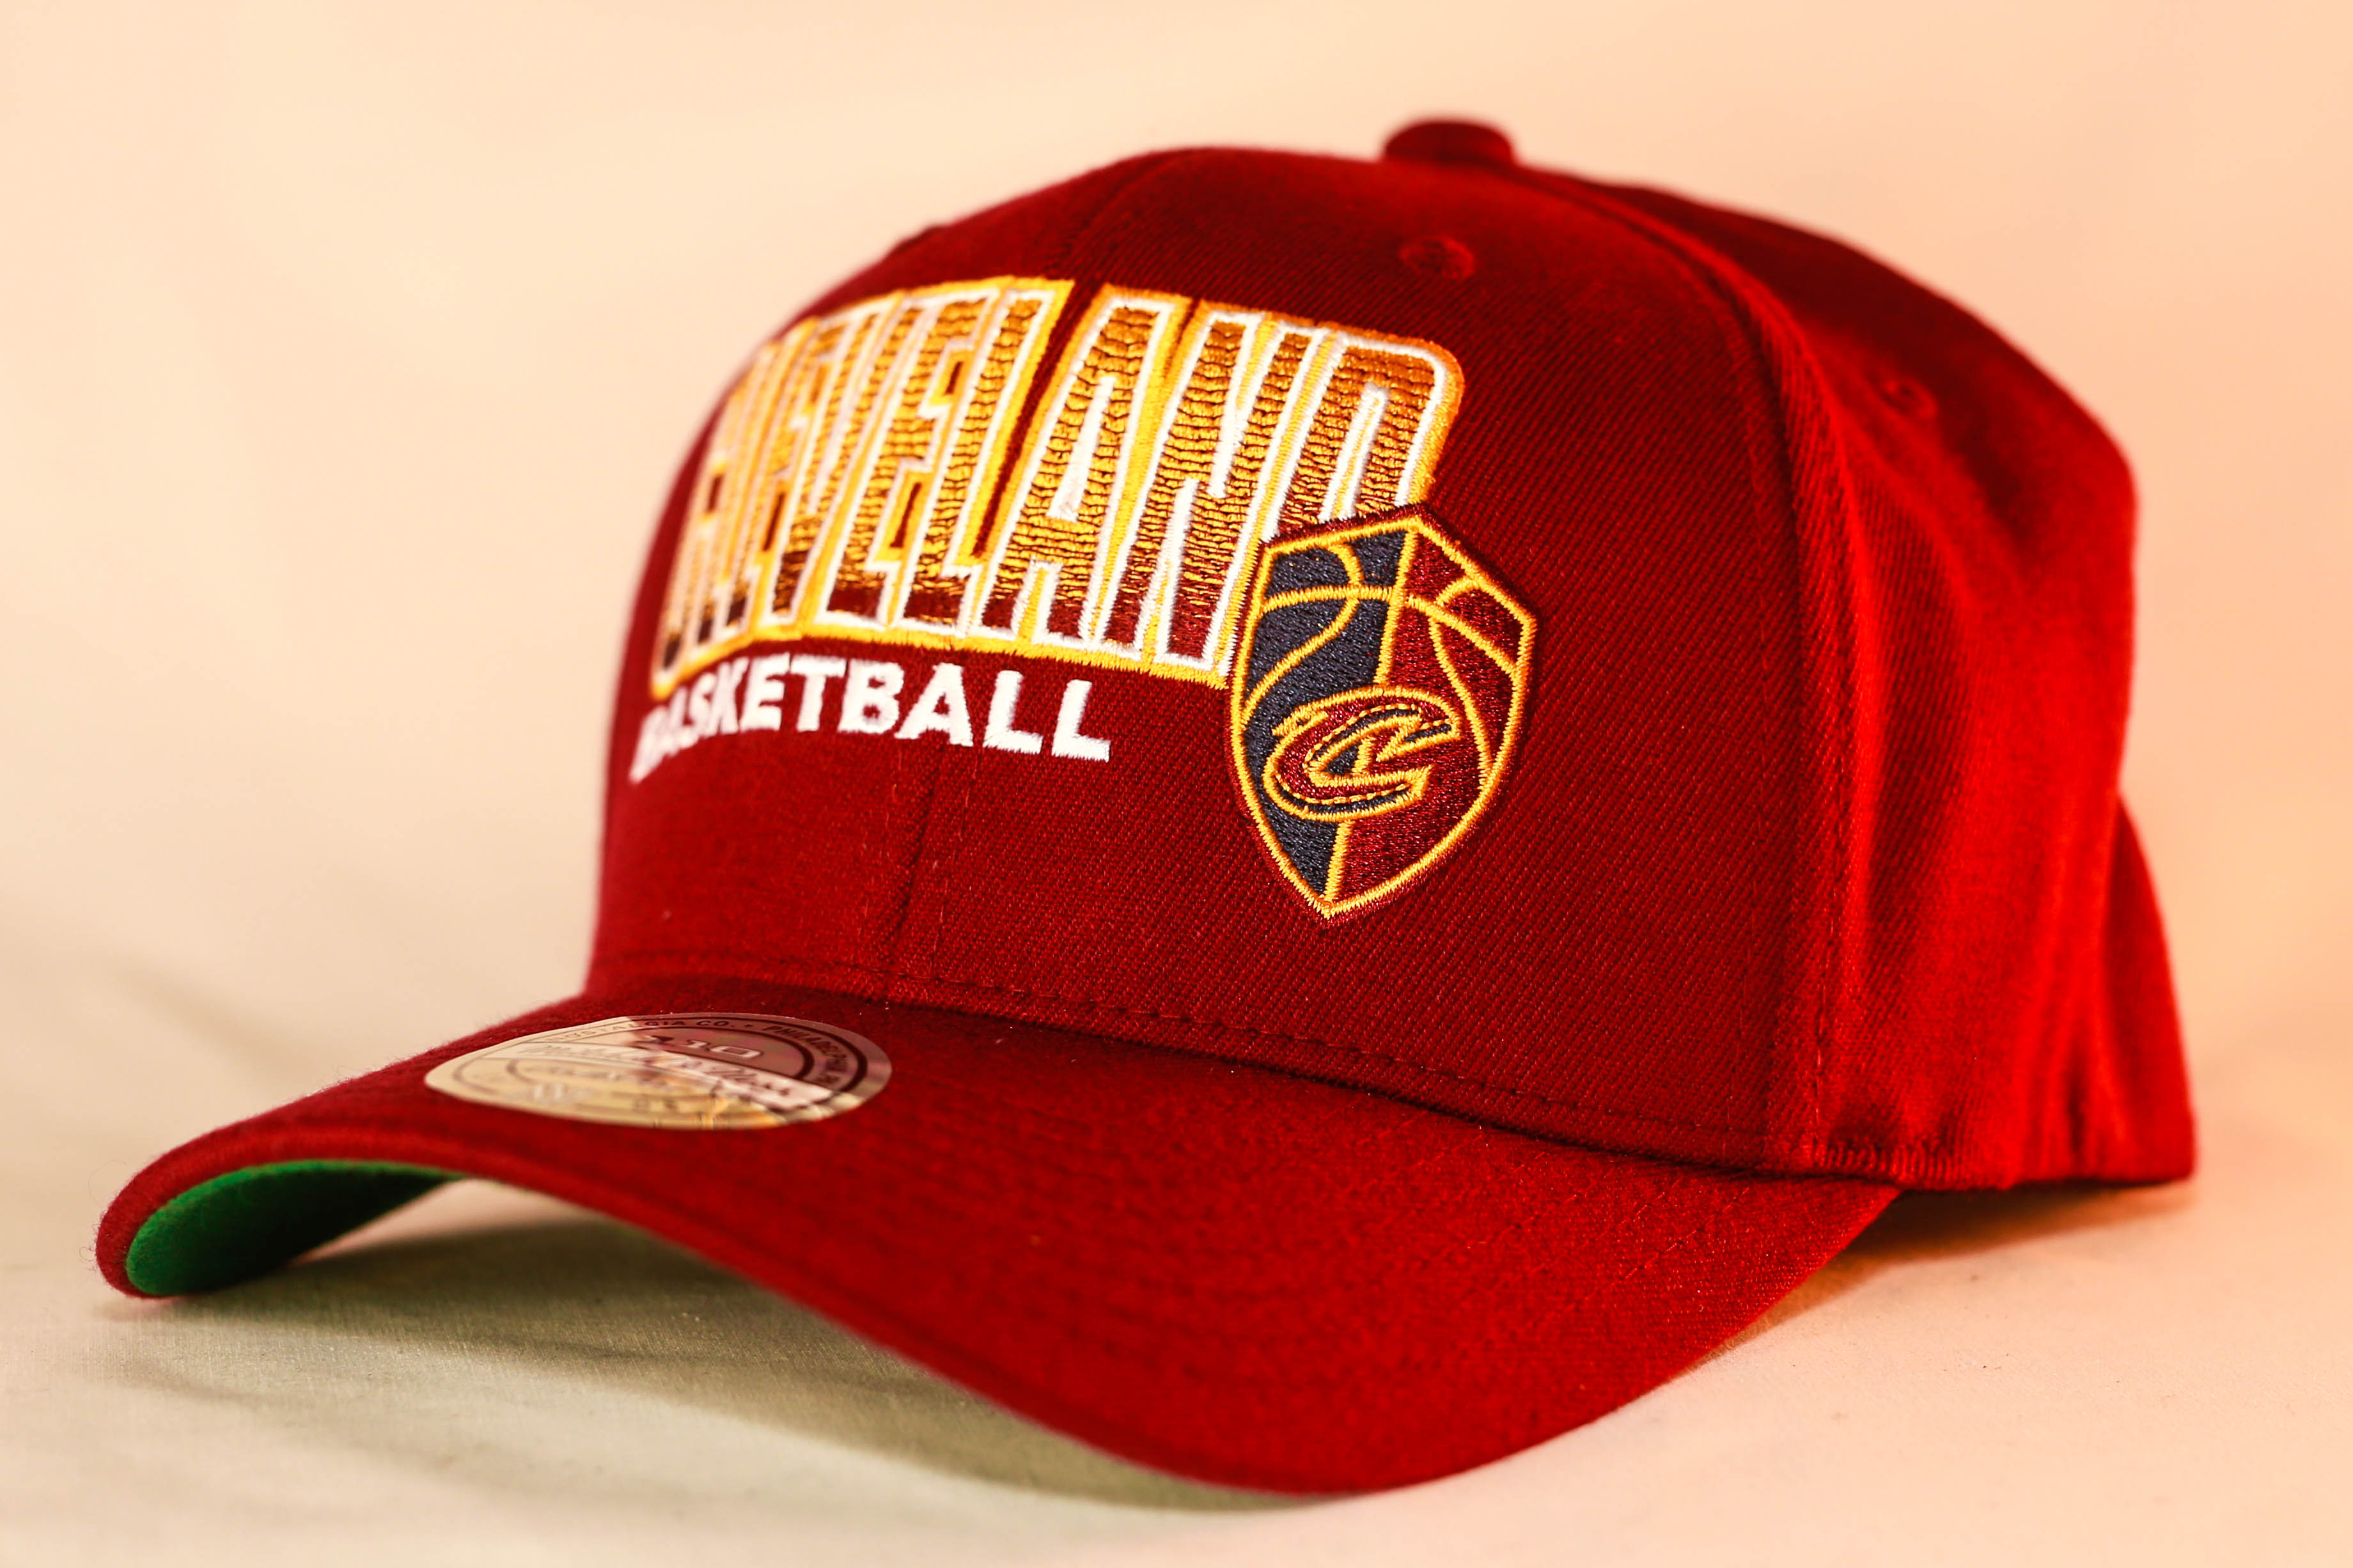 Mitchell & Ness Men's Cleveland Cavaliers Red Snapback Hat